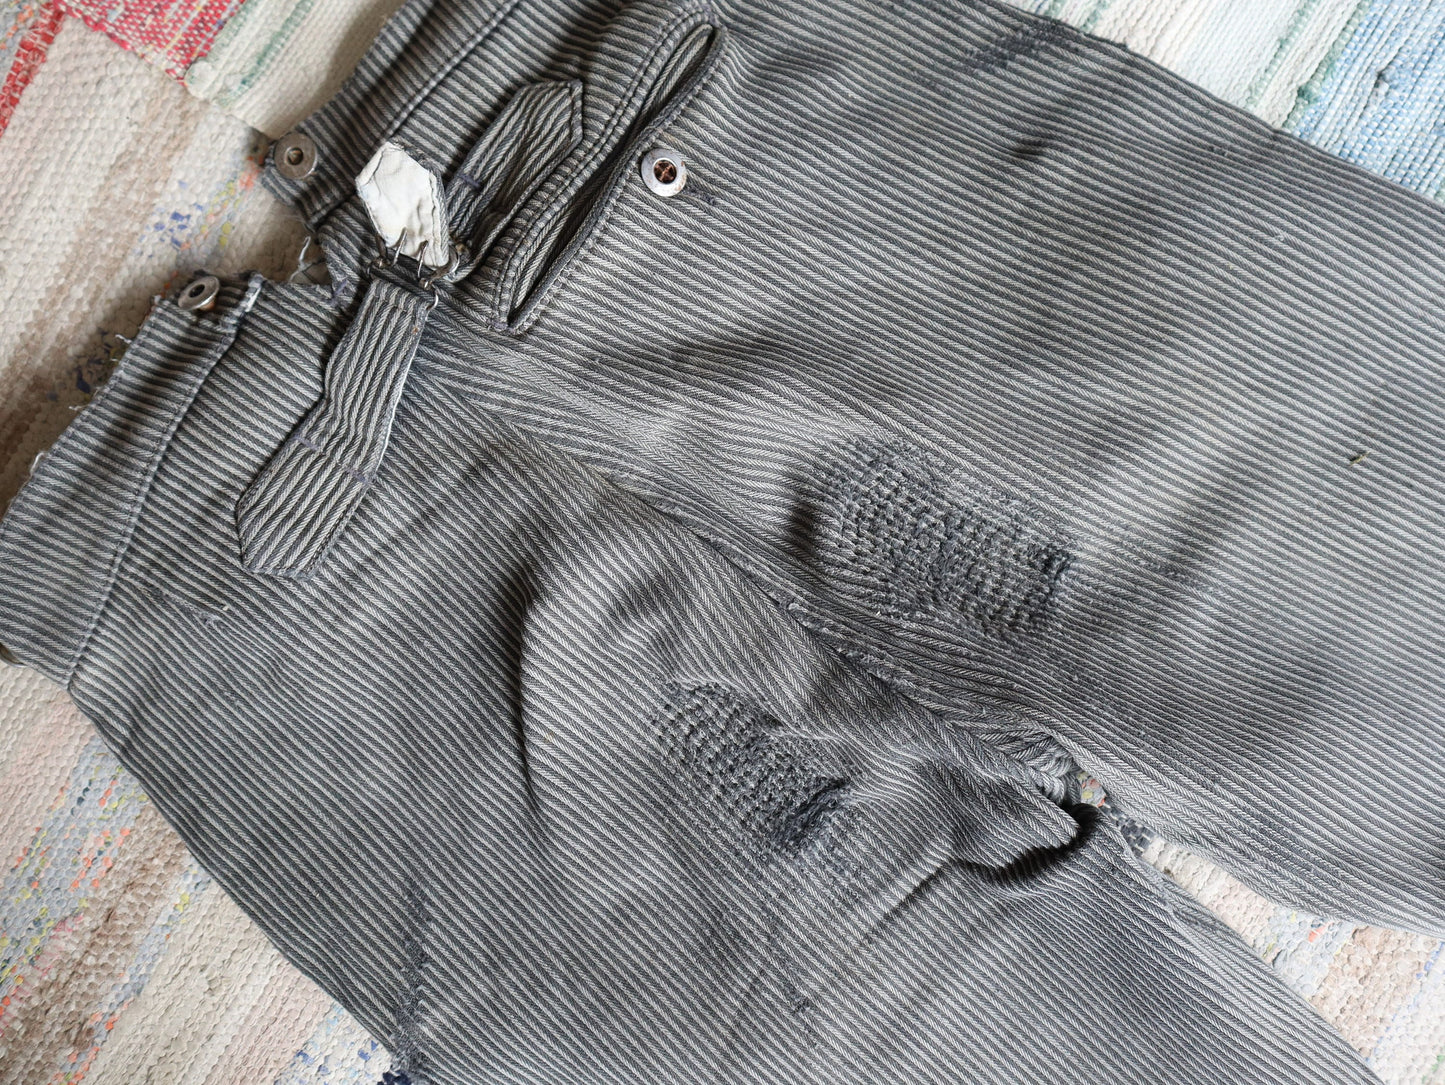 French 1940s Workwear Trousers Grey Stripe Coutil Cotton Repaired Patched Darned Chore